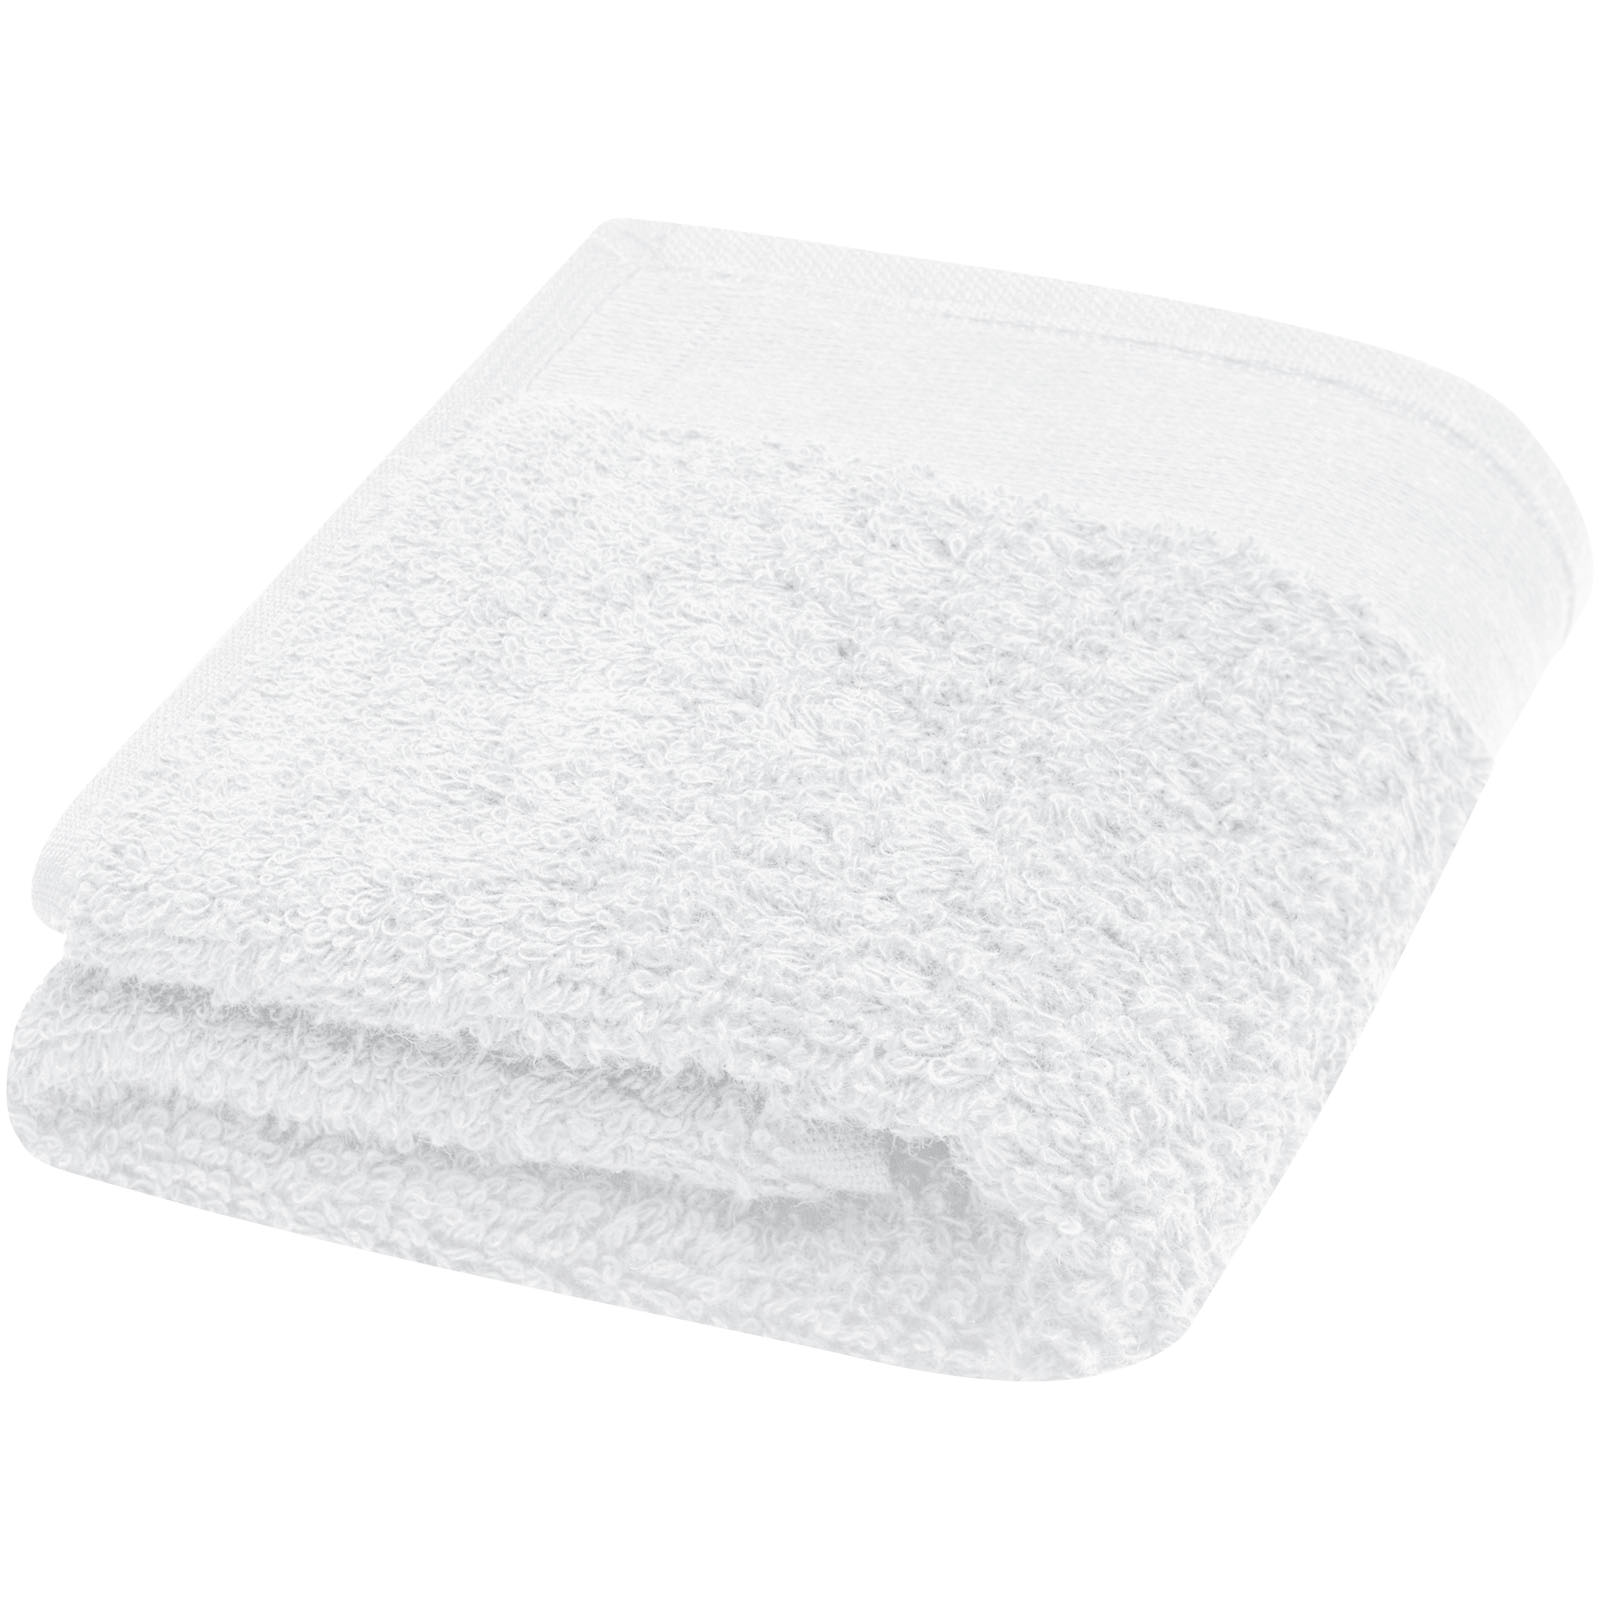 Sustainable Thick Soft Towel - Downholland